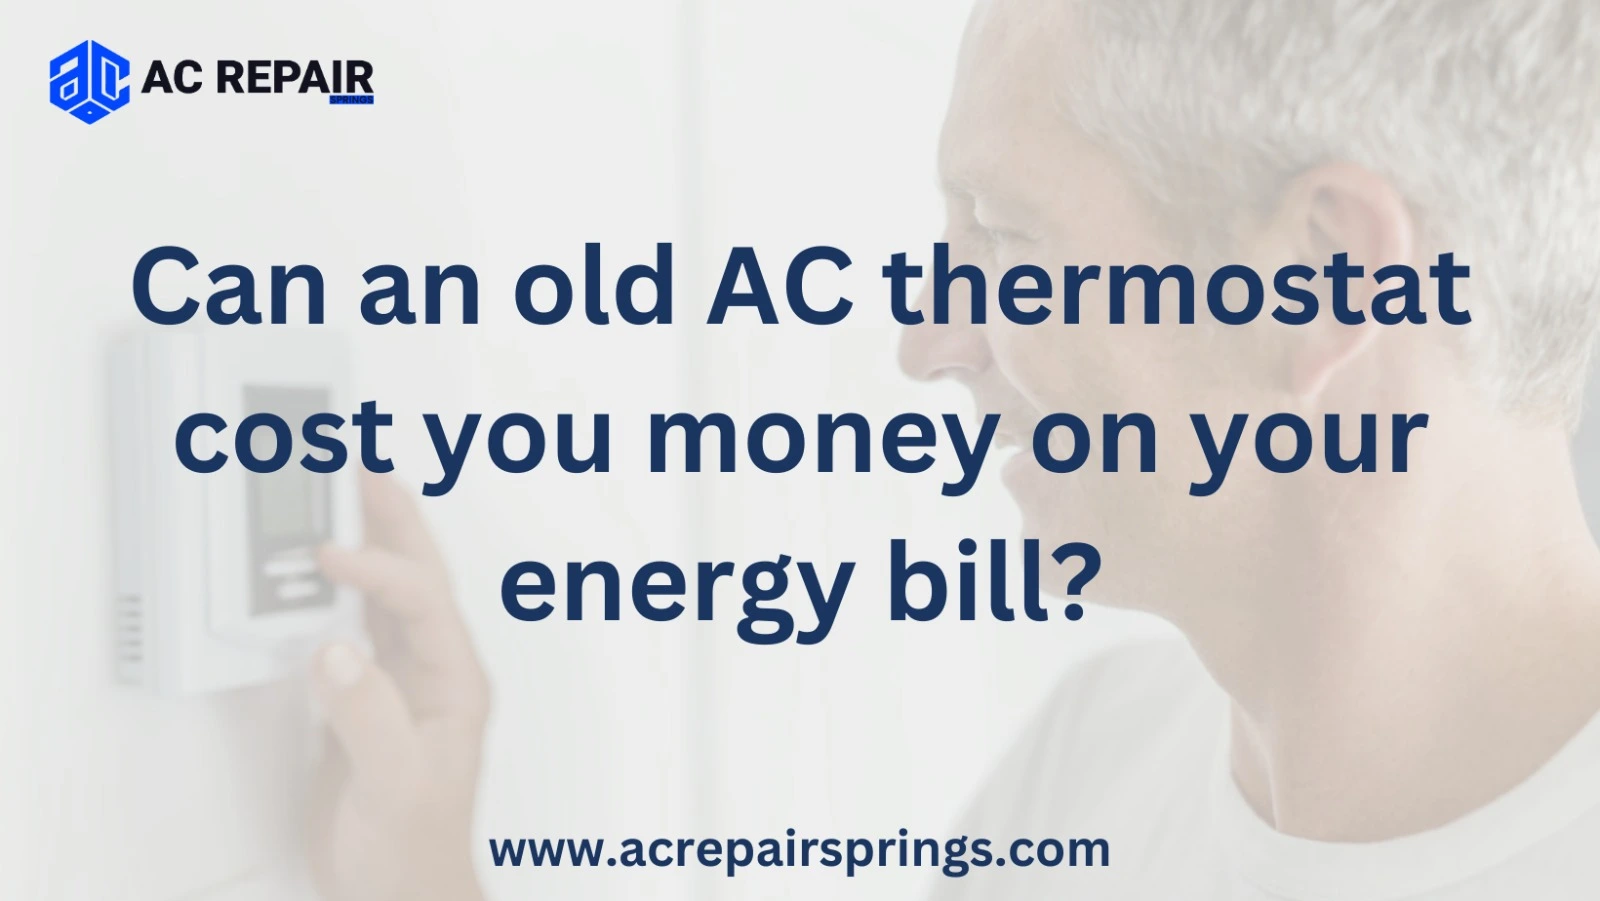 Can an old AC thermostat cost you money on your energy bill?